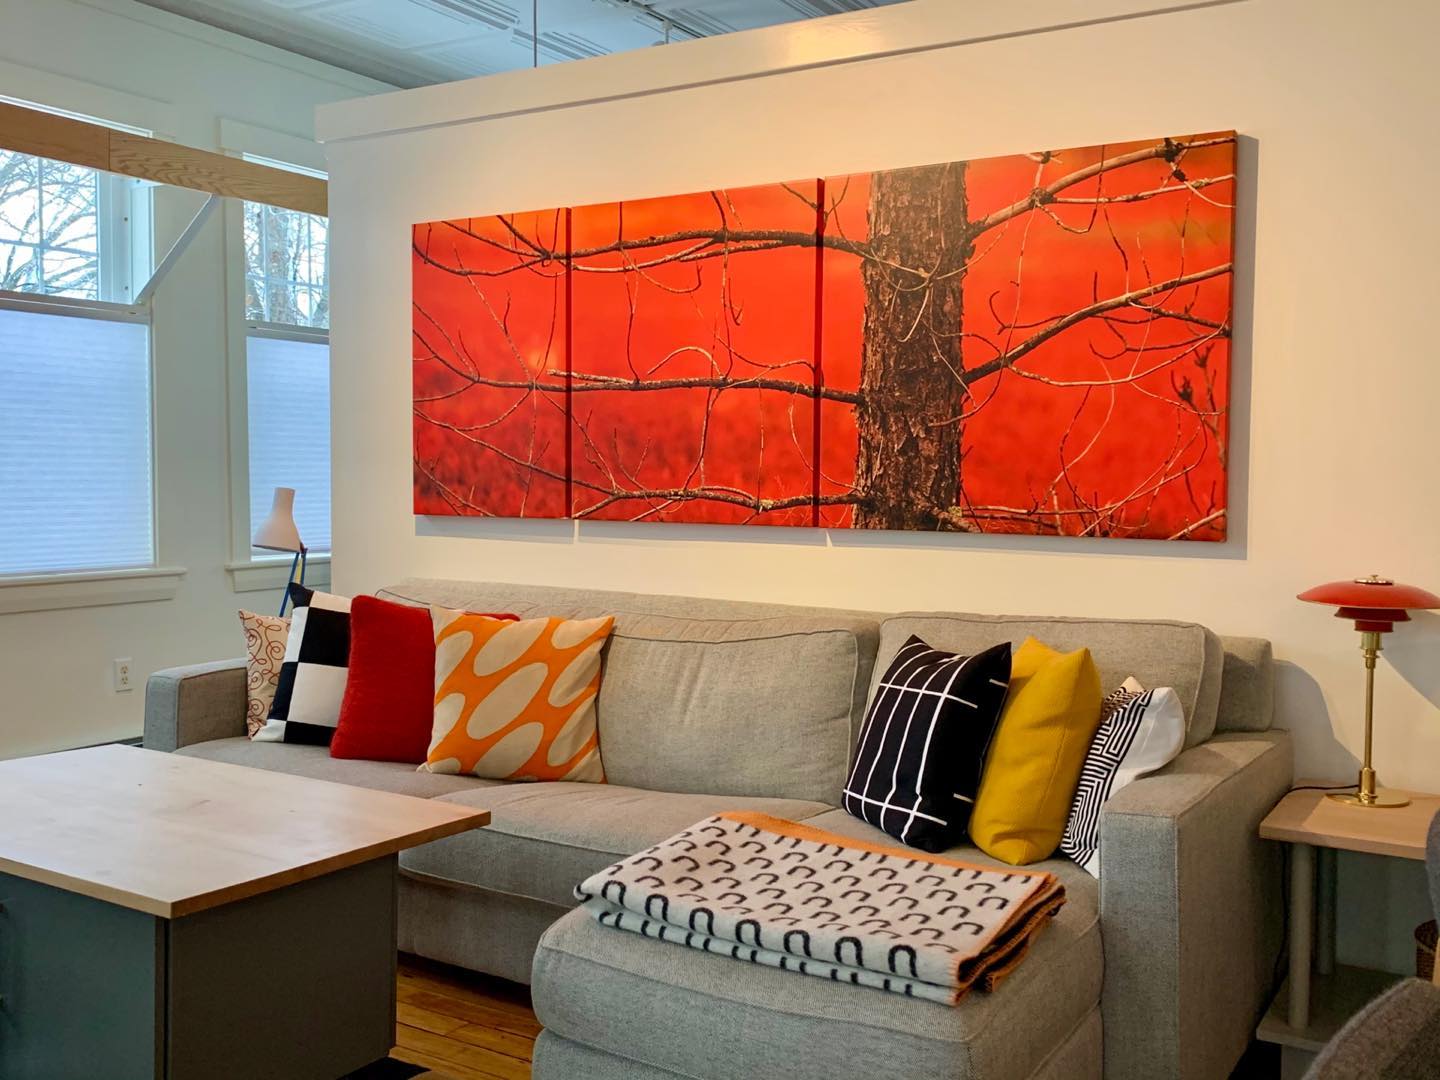 New triptych on Living Room wall adds festive color during winter days. #orcuttphotography #pineinueberryfield #mainephoto #mainerheway #naturephotography